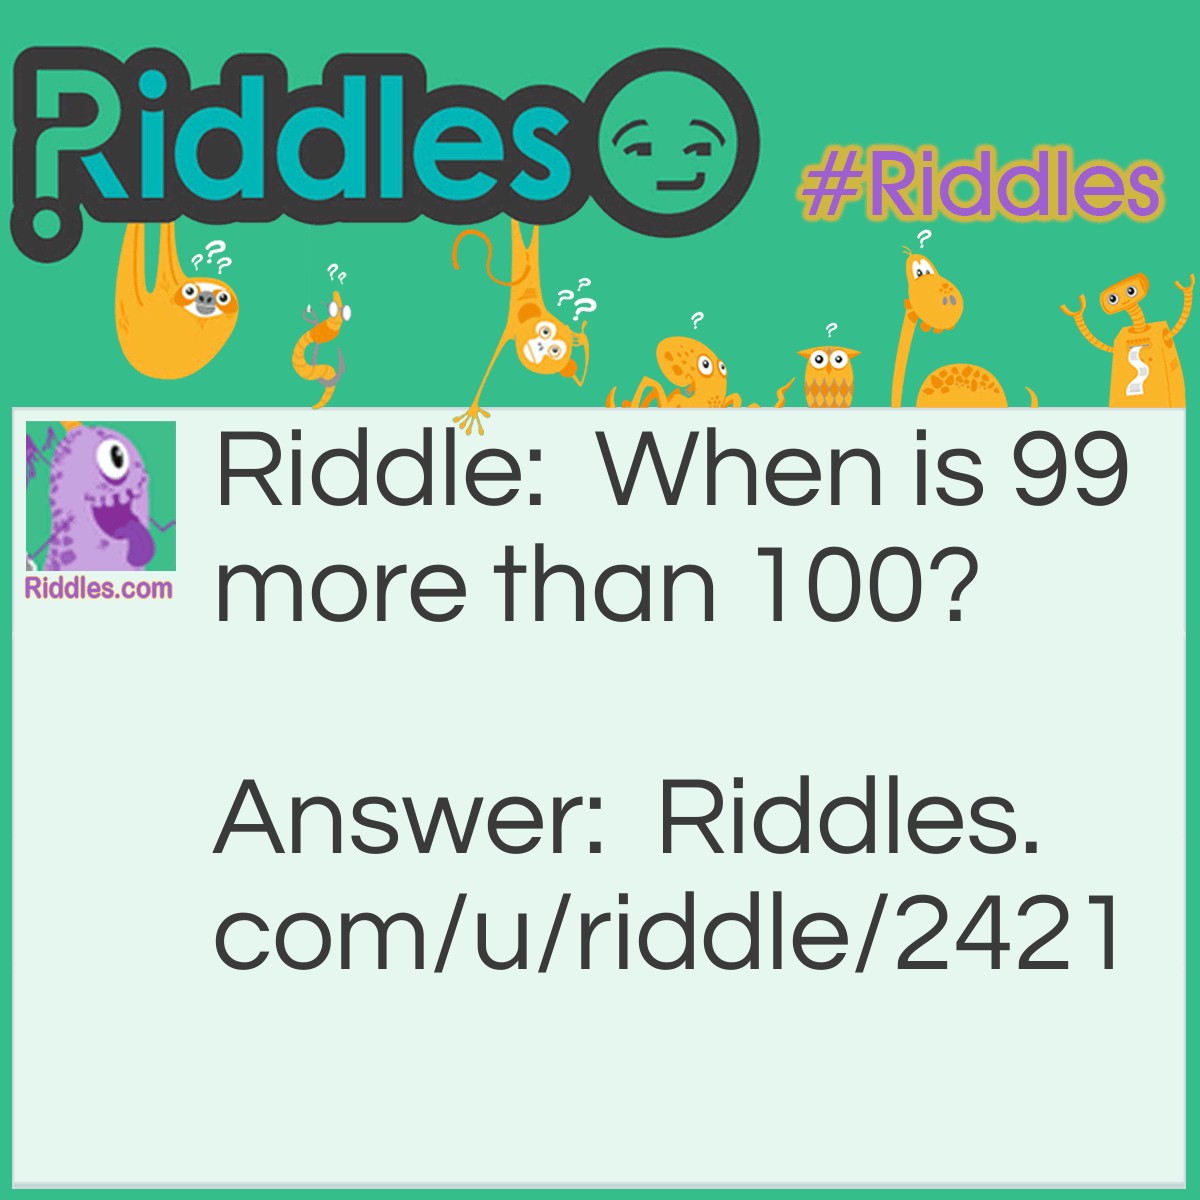 Riddle: When is 99 more than 100? Answer: A microwave. Generally when you run a microwave for '99' it runs for 1 minute and 39 seconds. '100' runs for 1 minute.